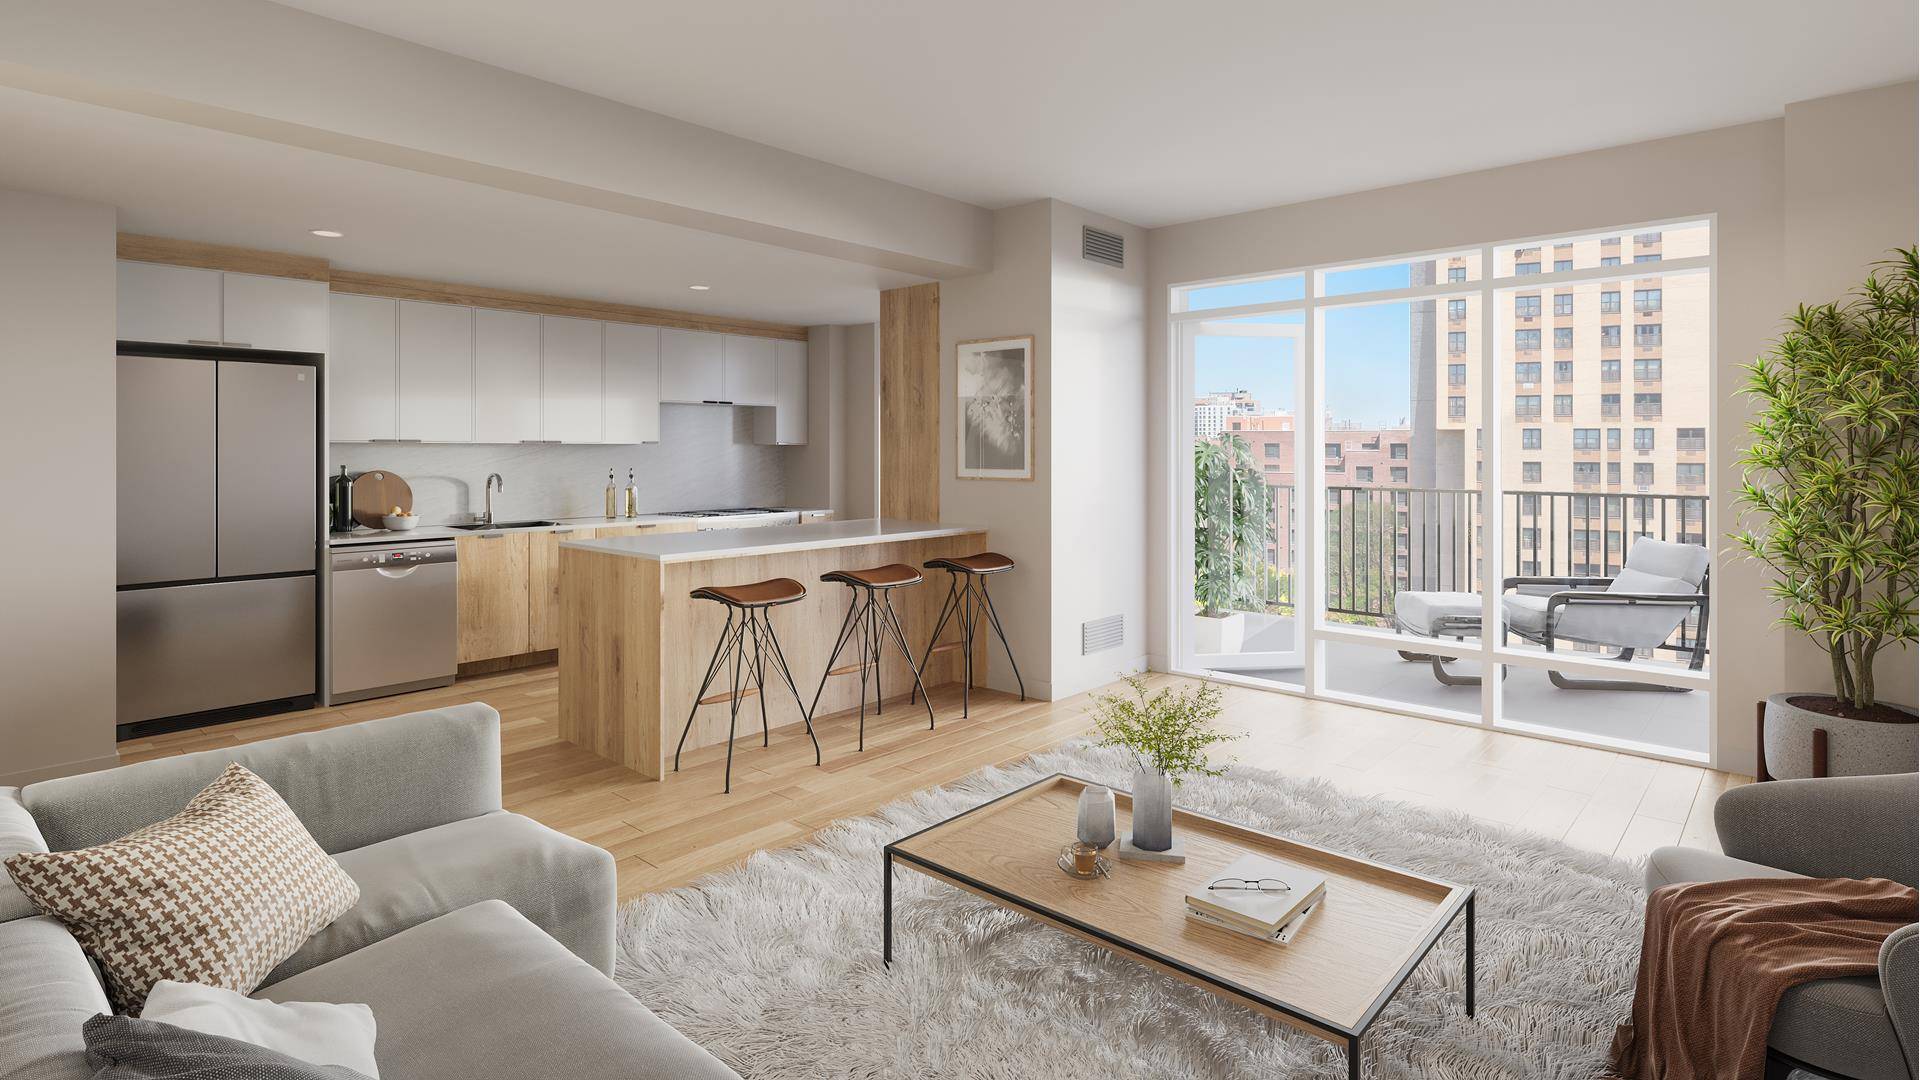 Immediate Occupancy ! Brand new North East facing 1 BdRm 1 bath condo residence with large balcony at the PATAGONIA a ground up 12 story development just now completed in ...